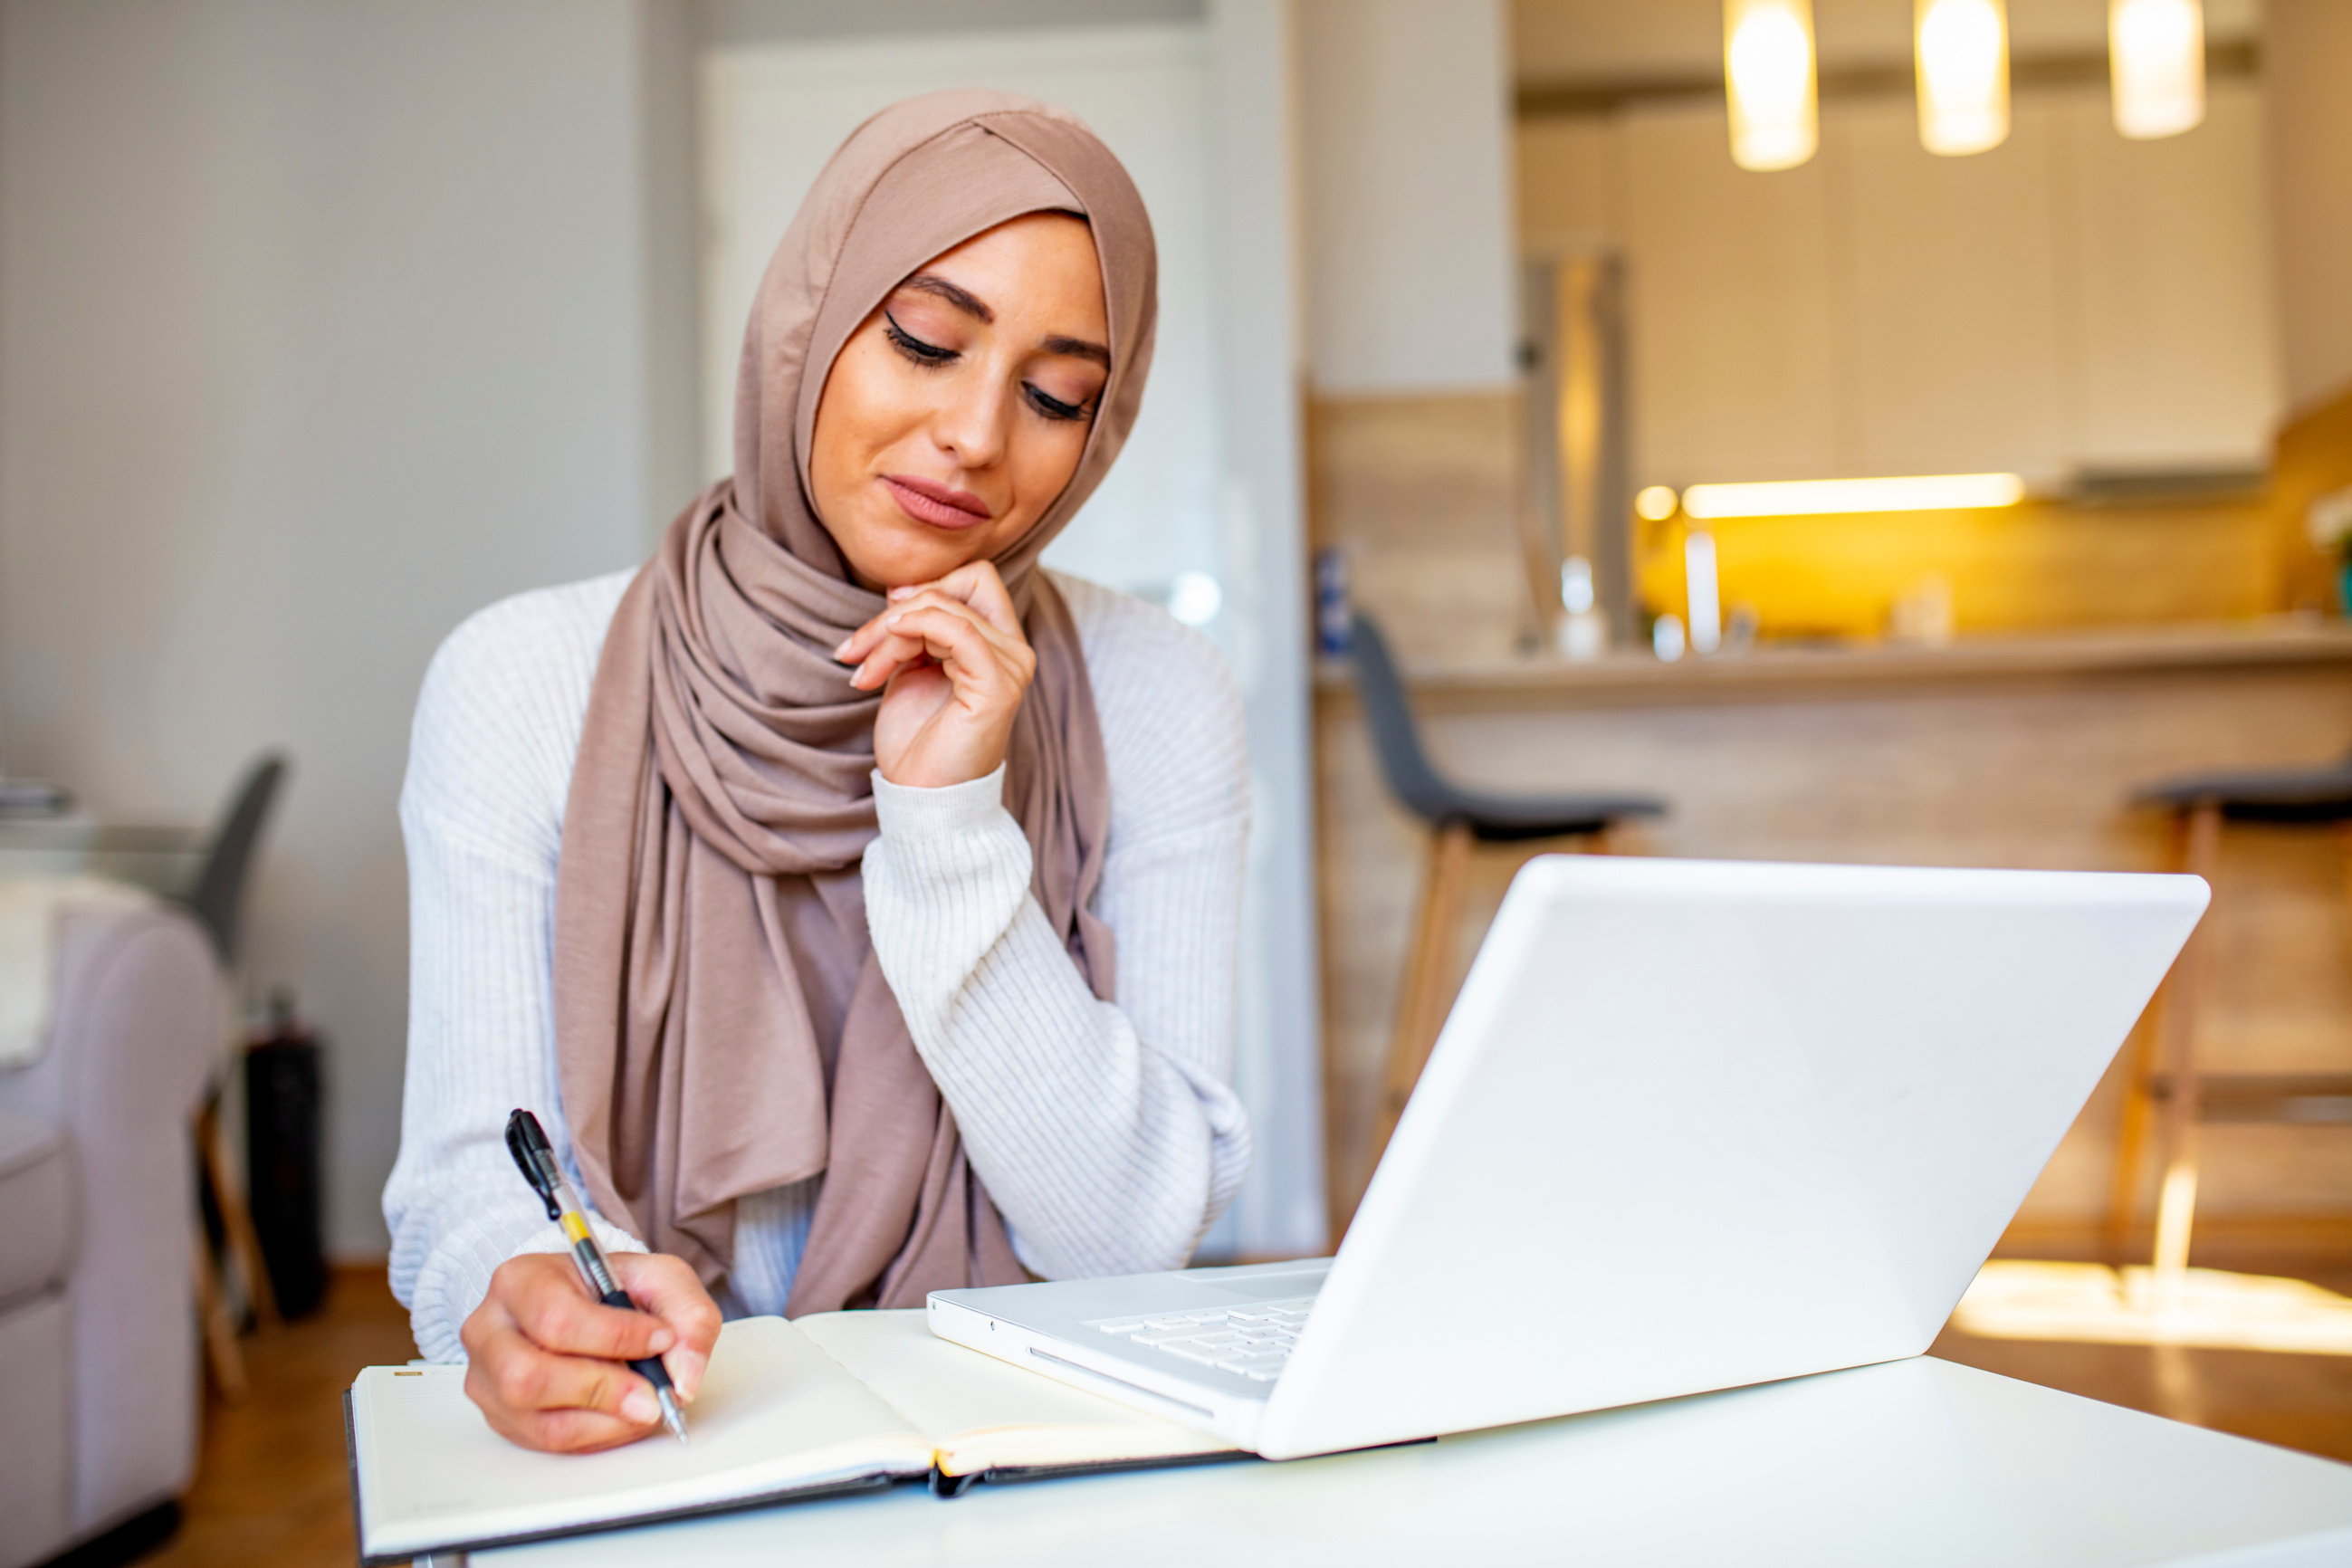 Muslim woman working with computer.